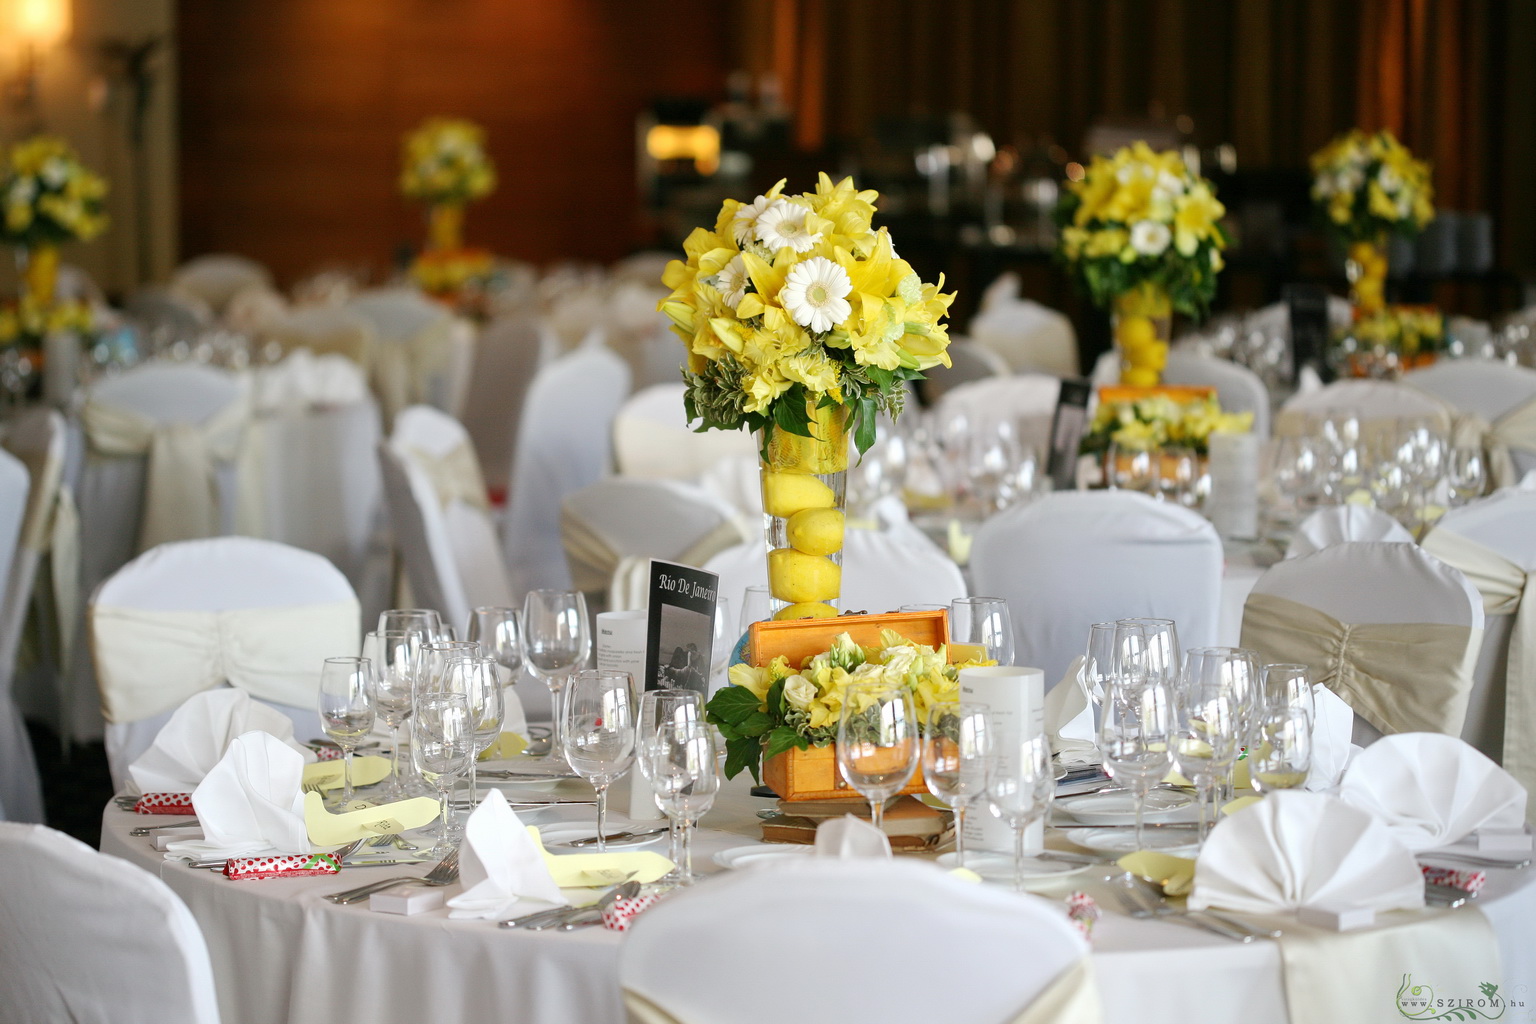 flower delivery Budapest - Tall centerpiece, with book and wooden chest yellow decor, Marriott Hotel (lilies, gerberas, gladioluses), wedding